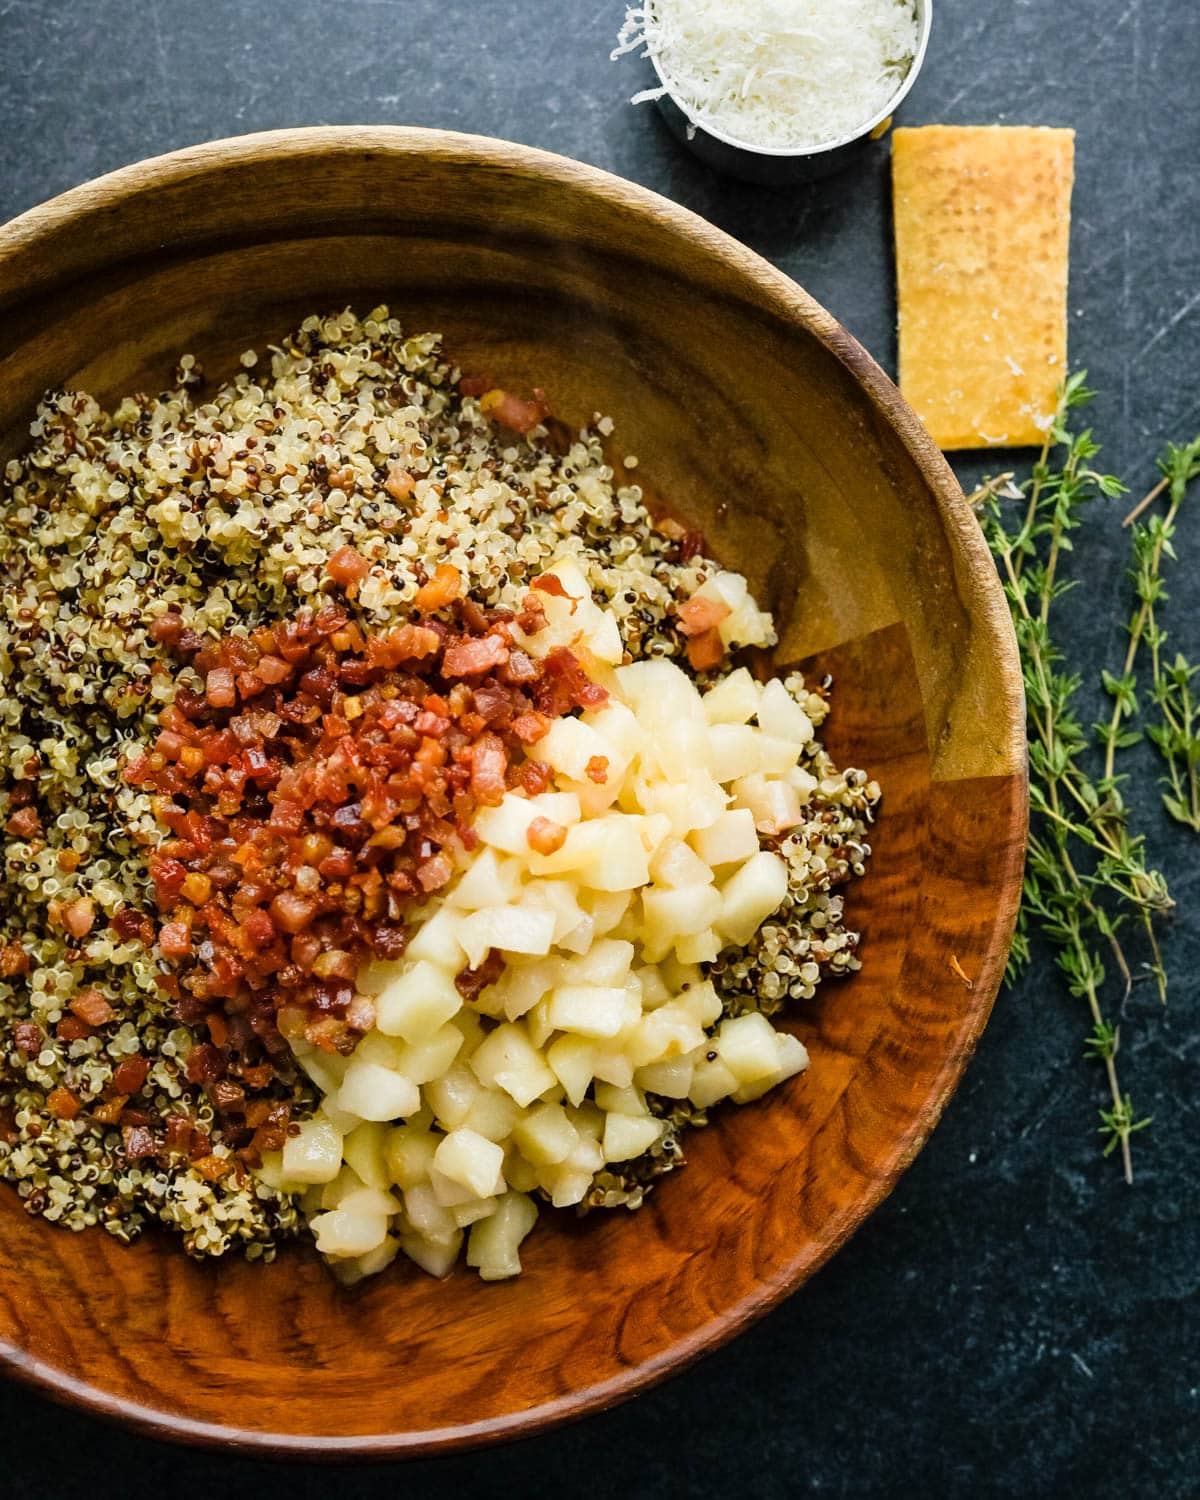 Blending hte apple and pancetta with cooked quinoa.